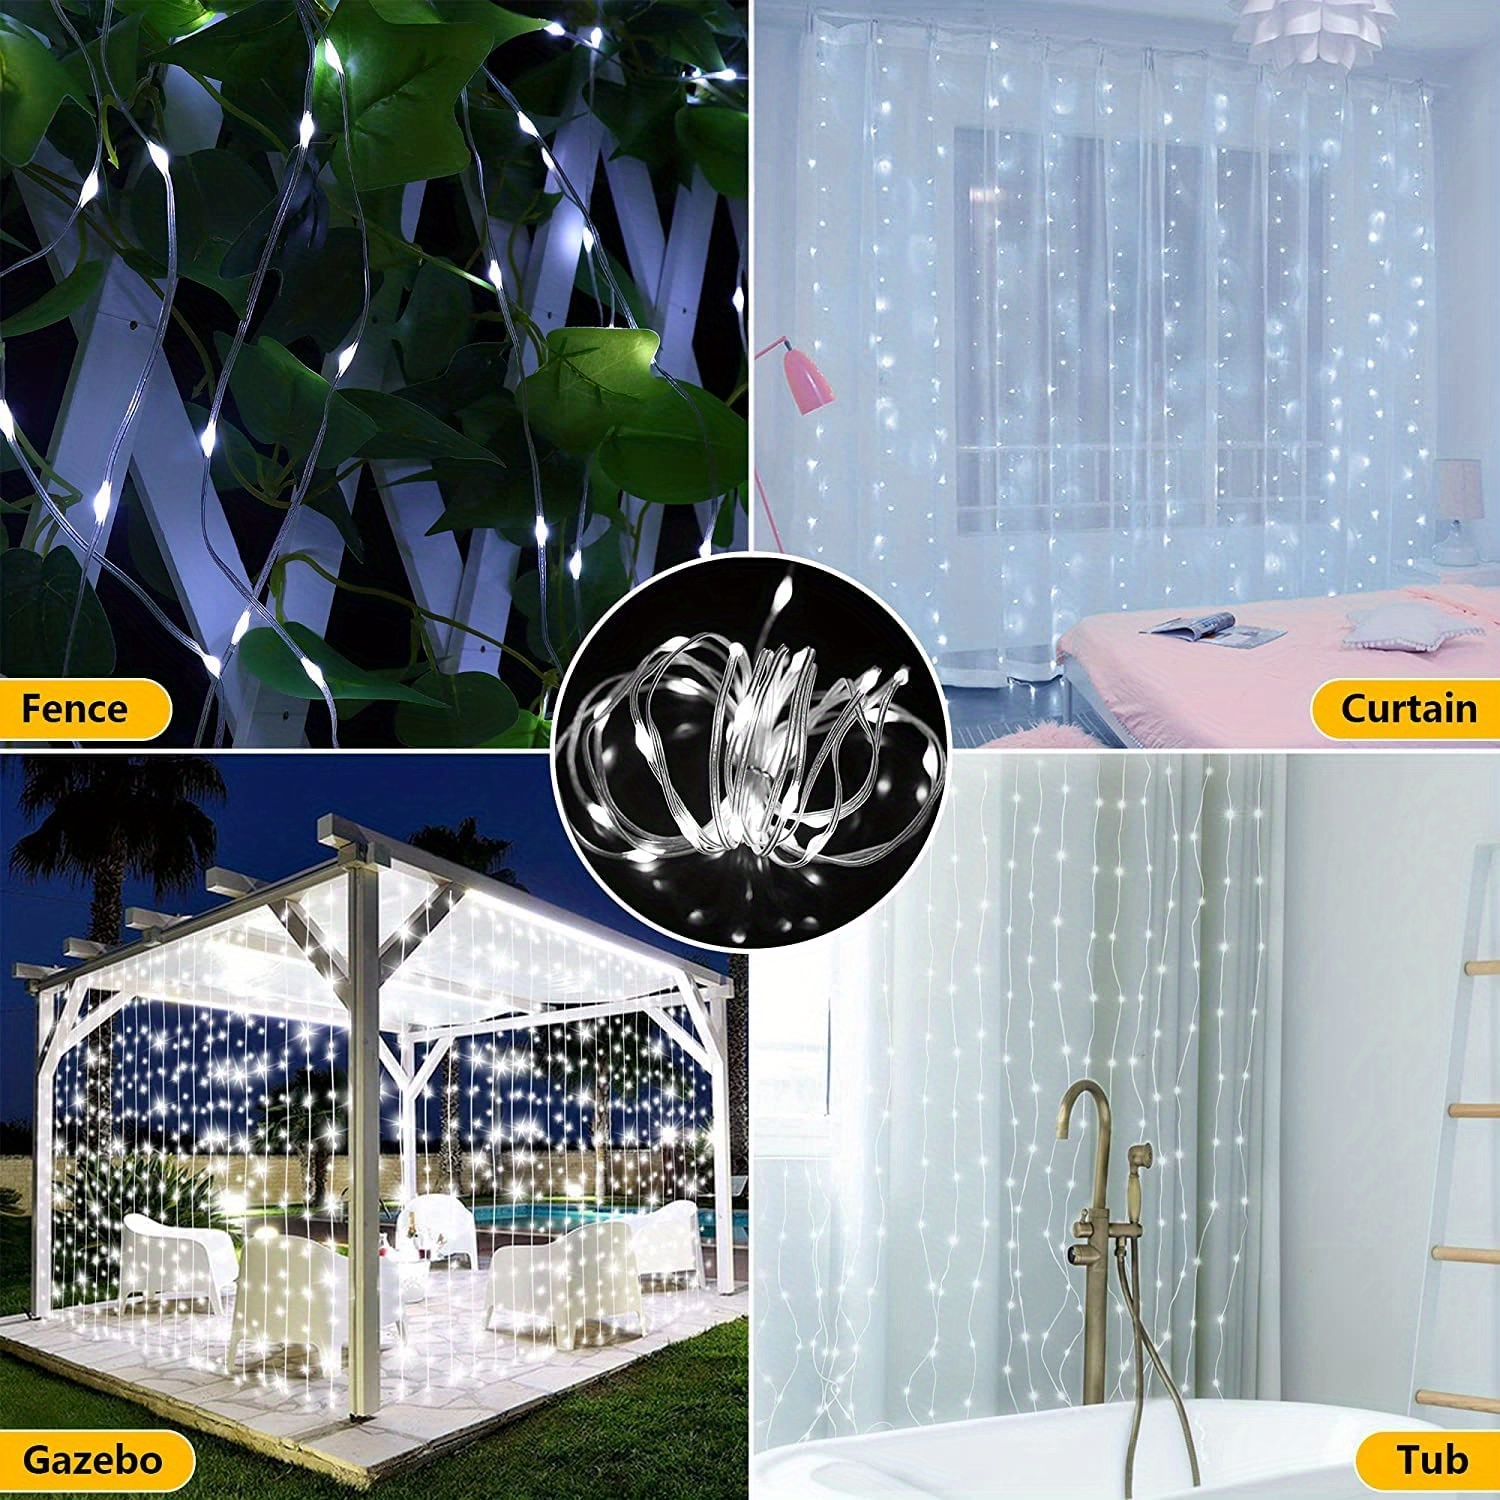 1pc 300 leds solar curtain light rubber insulated wire outdoor remote control light 8 lighting modes fairy lights ip68 waterproof copper wire lights christmas party wedding home bedroom garden wall decor details 11